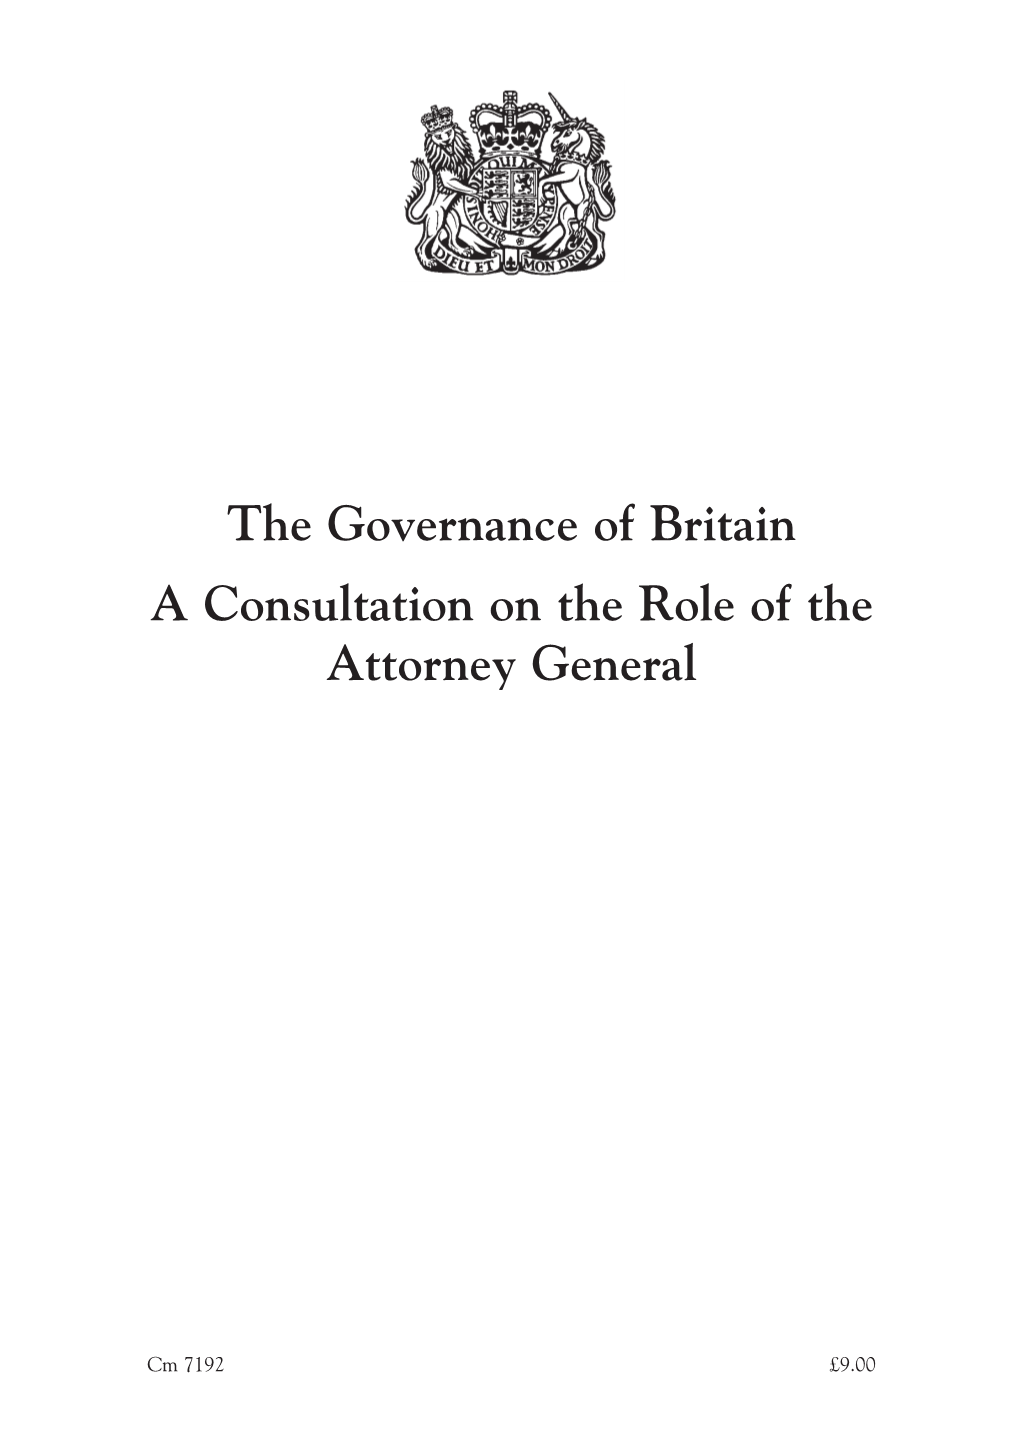 The Governance of Britain a Consultation on the Role of the Attorney General